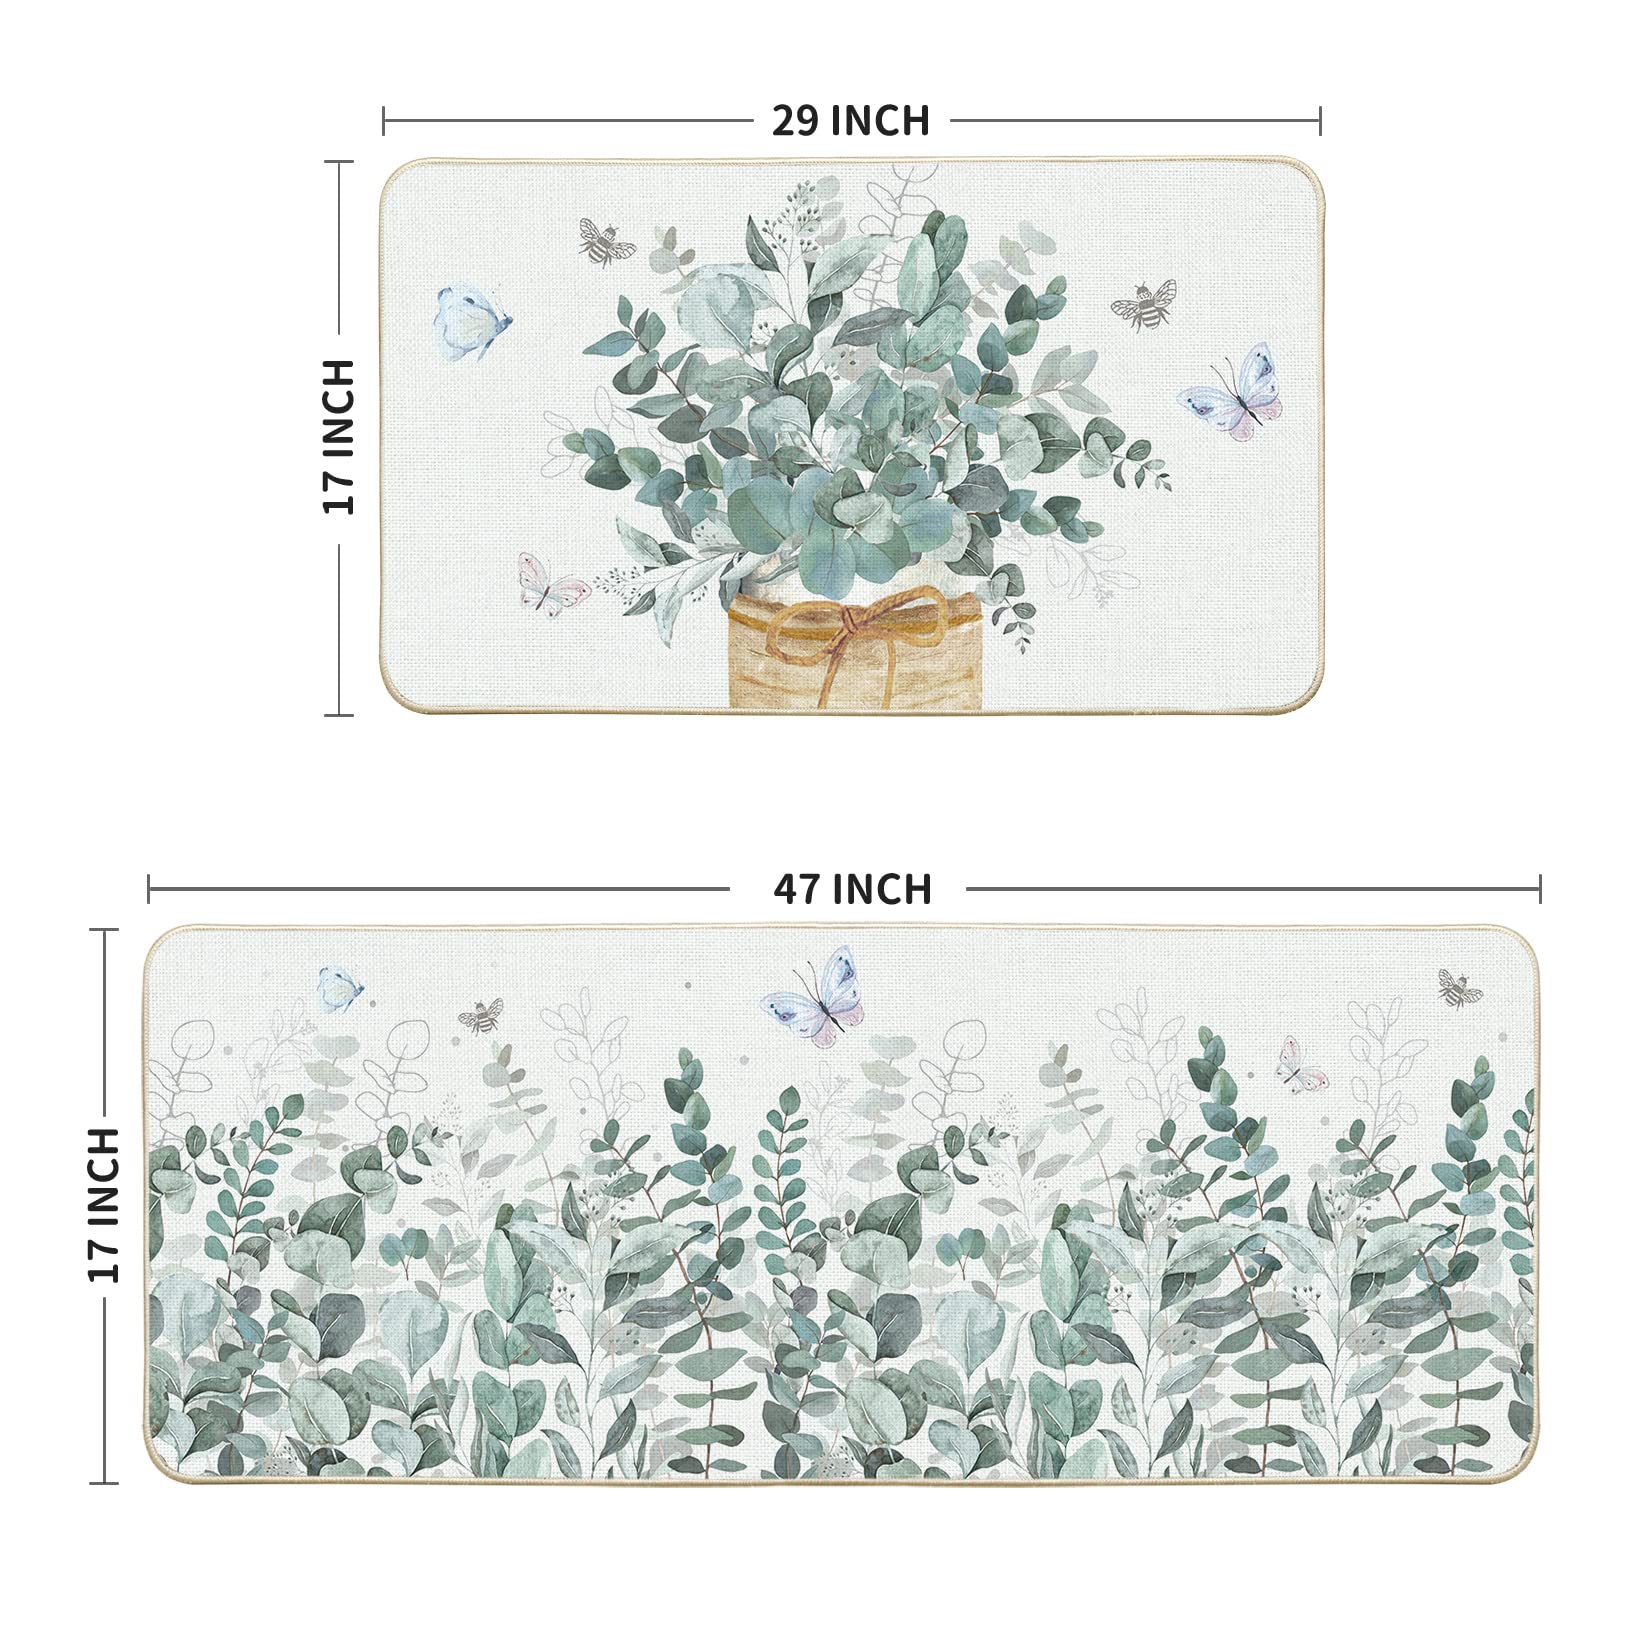 Artoid Mode Eucalyptus Vase Butterfly Summer Kitchen Mats Set of 2, Spring Home Decor Low-Profile Kitchen Rugs for Floor - 17x29 and 17x47 Inch